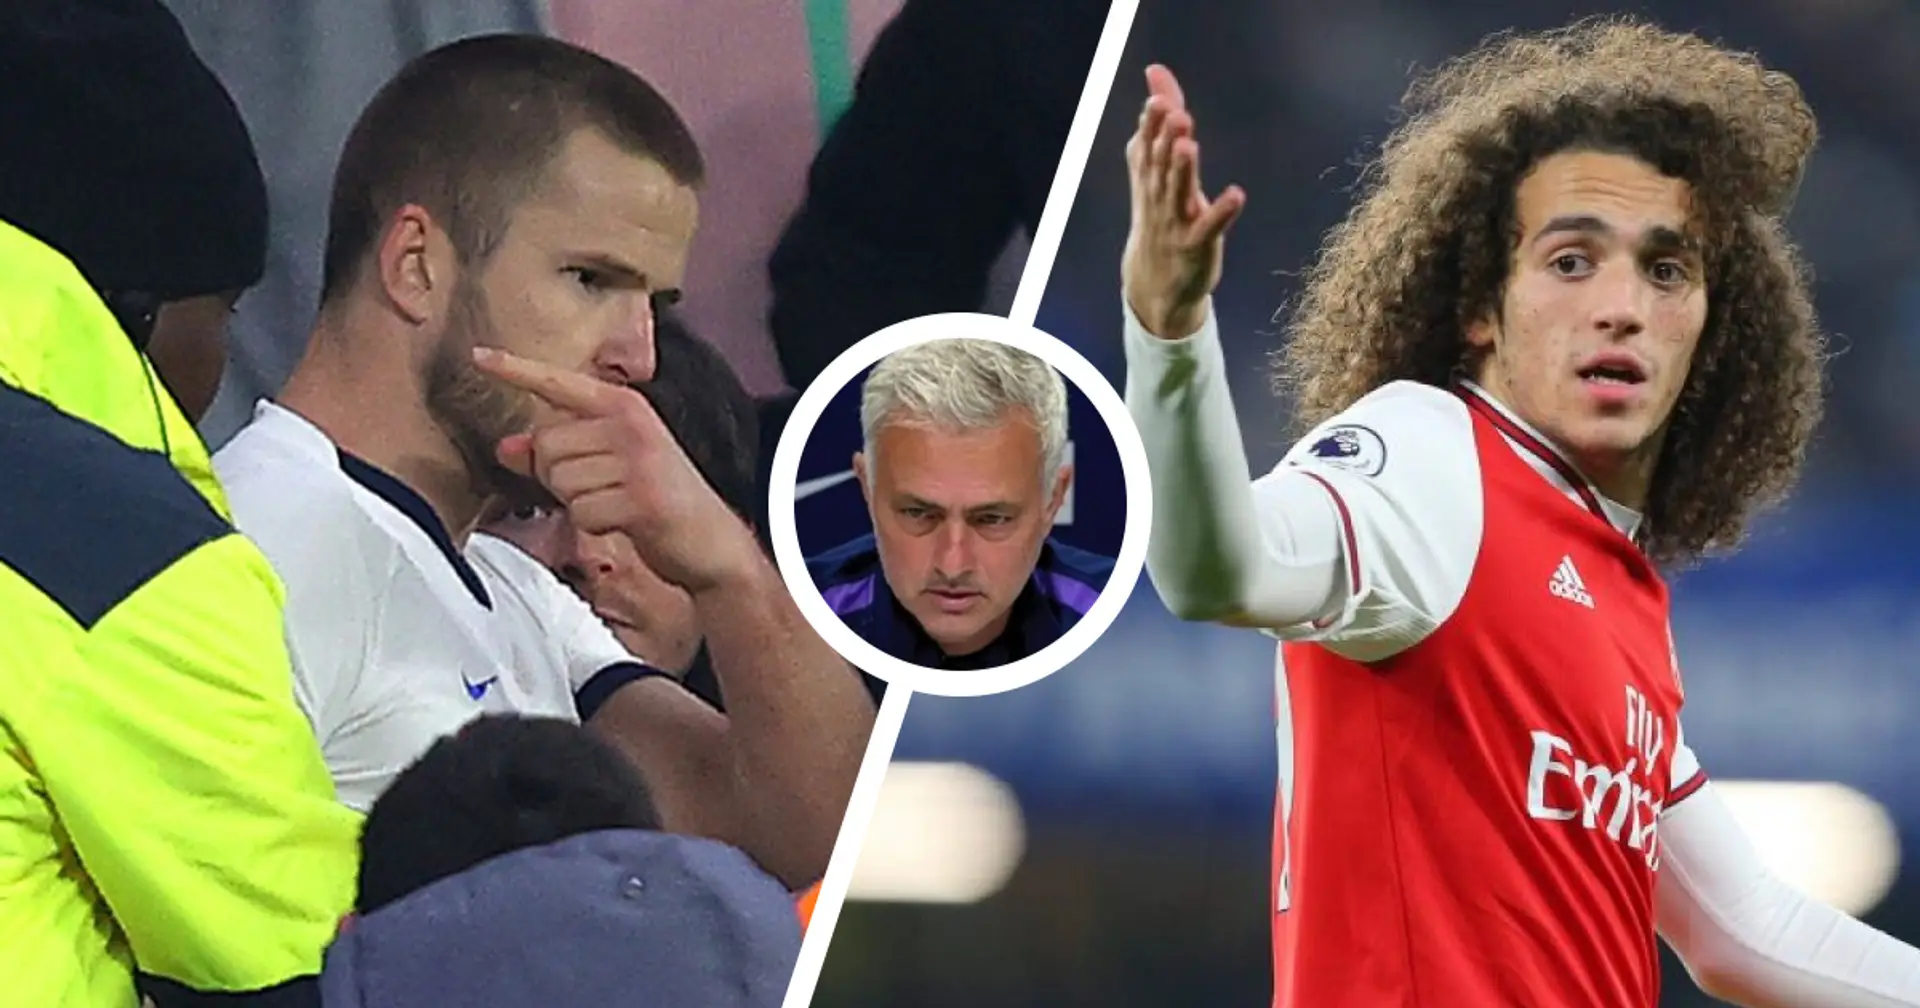 Jose Mourinho issues apologies for his Matteo Guendouzi comments in relation to Eric Dier ban